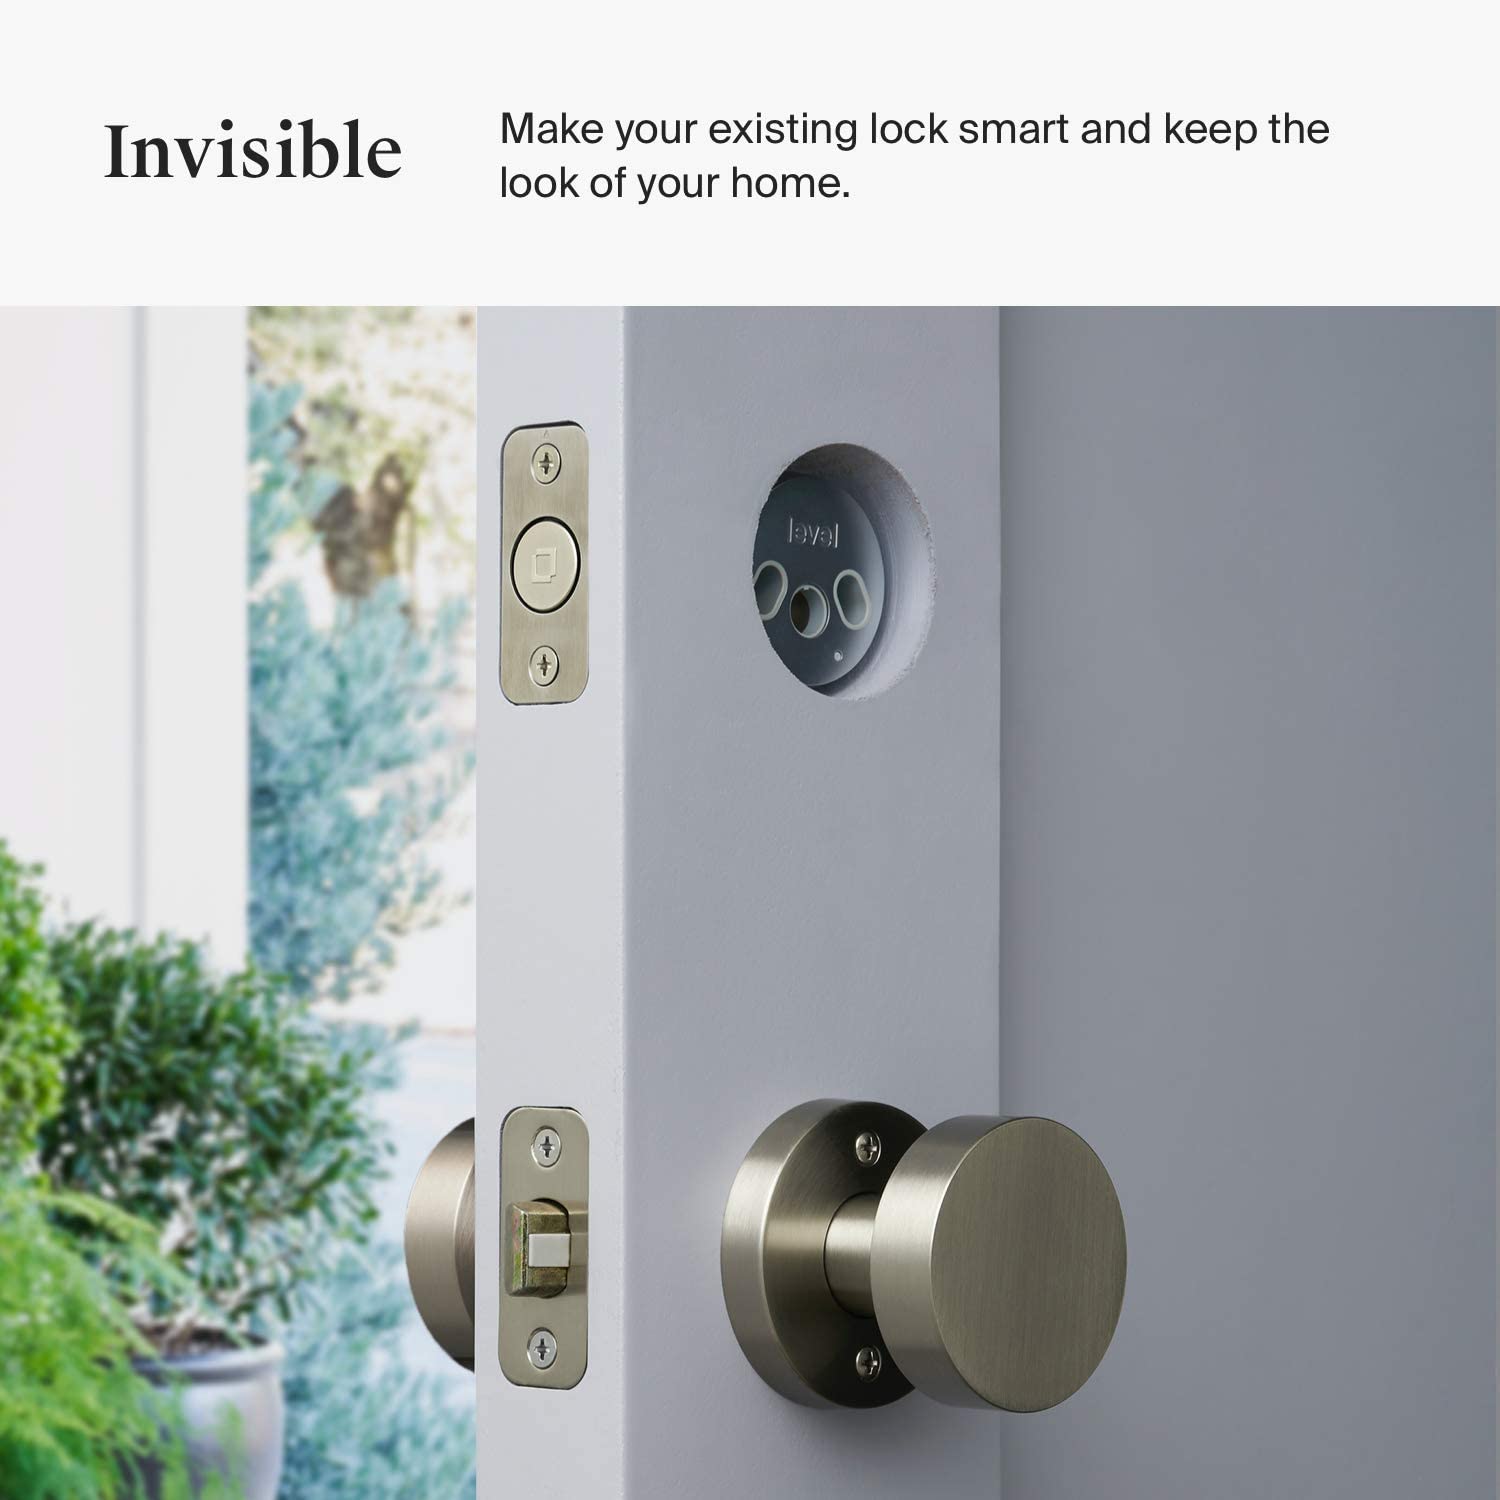 Level, Level Bolt, The Invisible Smart Lock. Bluetooth Deadbolt, Keyless Entry, Smartphone Access, Sharing, and Simple Installation